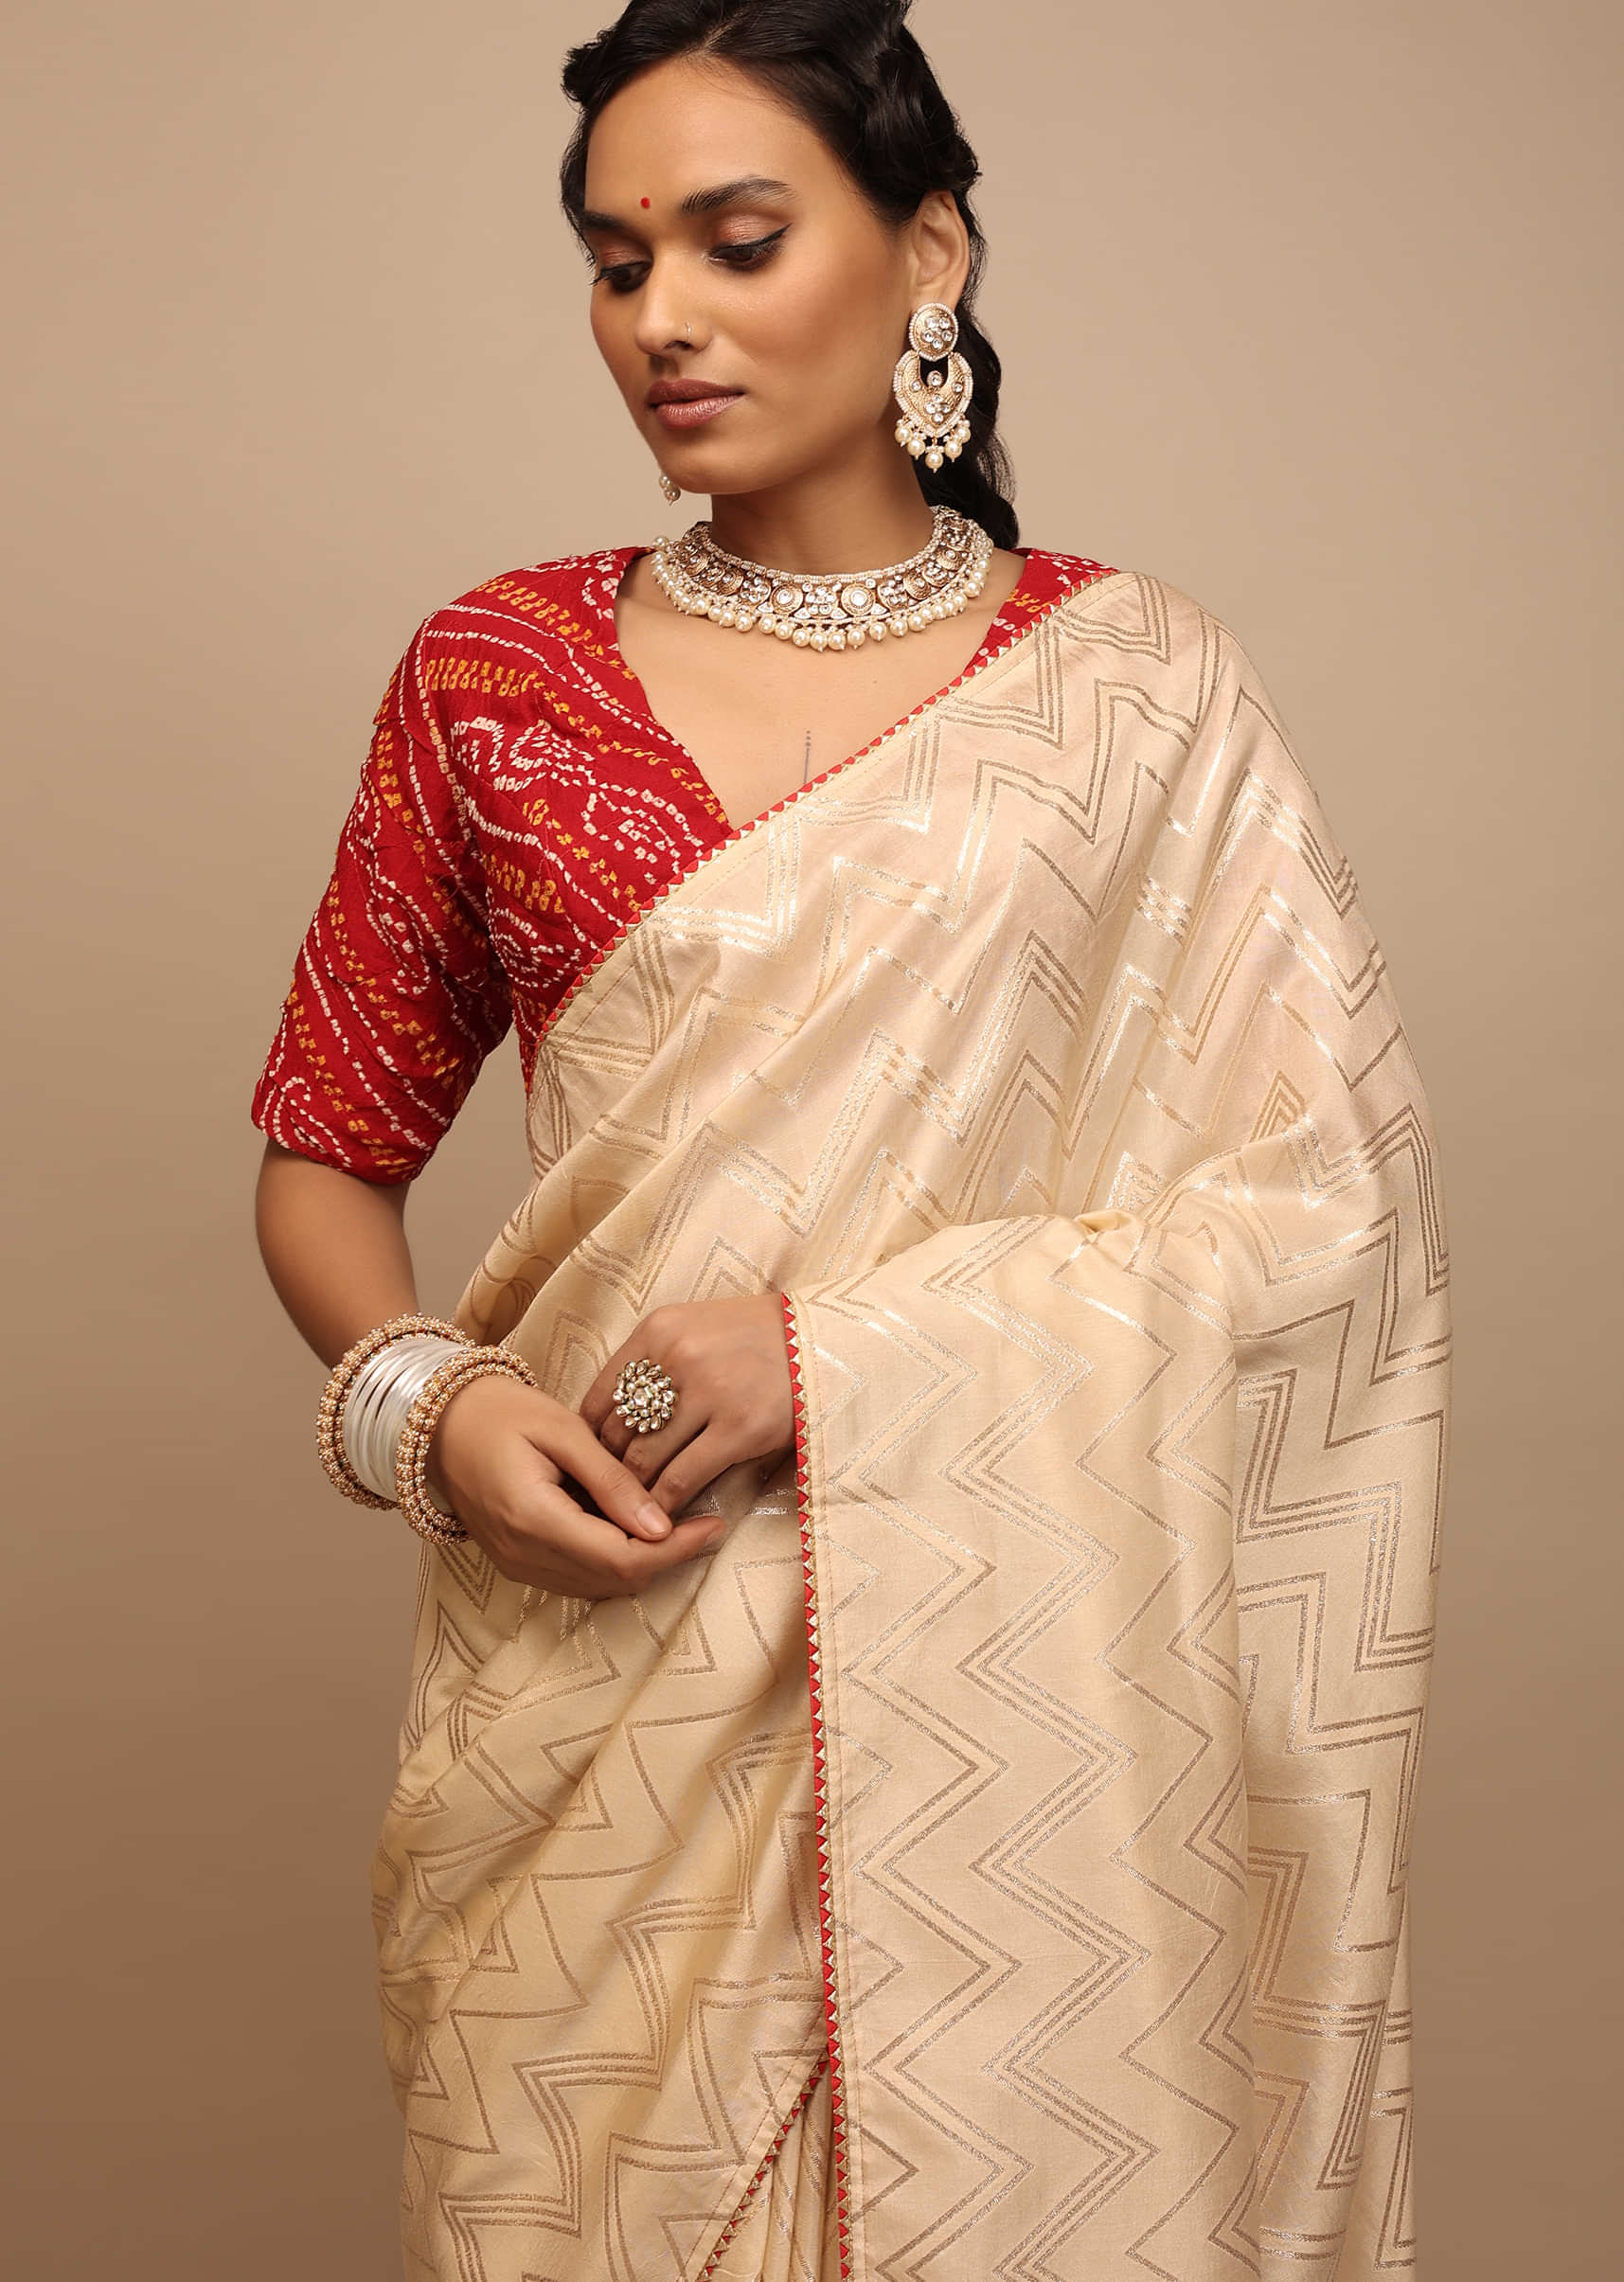 Cream Saree In Silk With Lurex Woven Chevron Design And Thin Border Along With Unstitched Blouse  